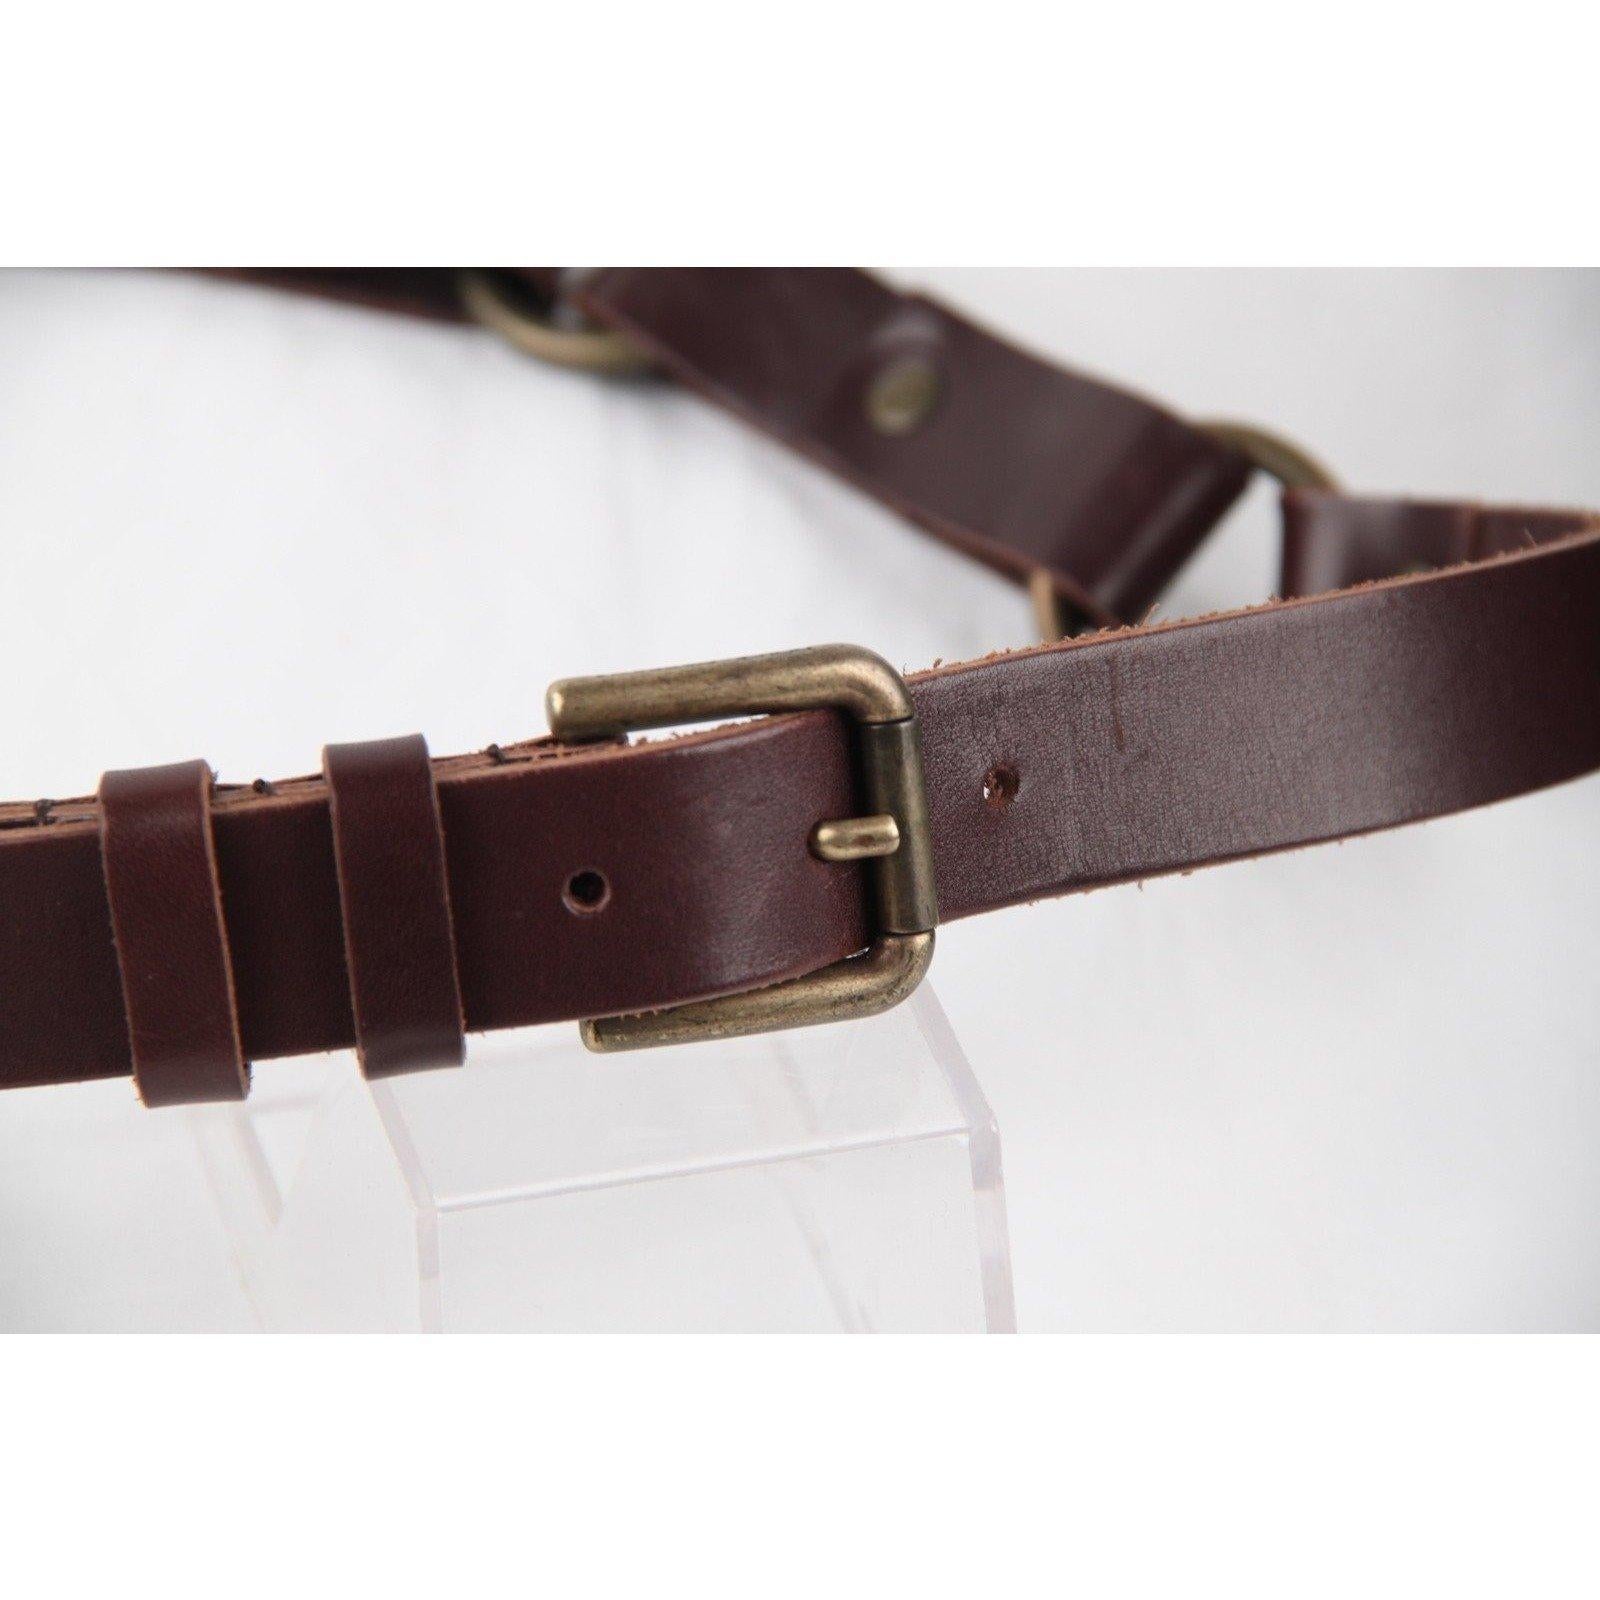 MATERIAL: Leather COLOR: Brown MODEL: Belt GENDER: Women SIZE: 42-90 COUNTRY OF MANUFACTURE: Italy Condition CONDITION DETAILS: B :GOOD CONDITION - Some light wear of use - Gently used! Light scratches due to normal use. Gently used! It will come